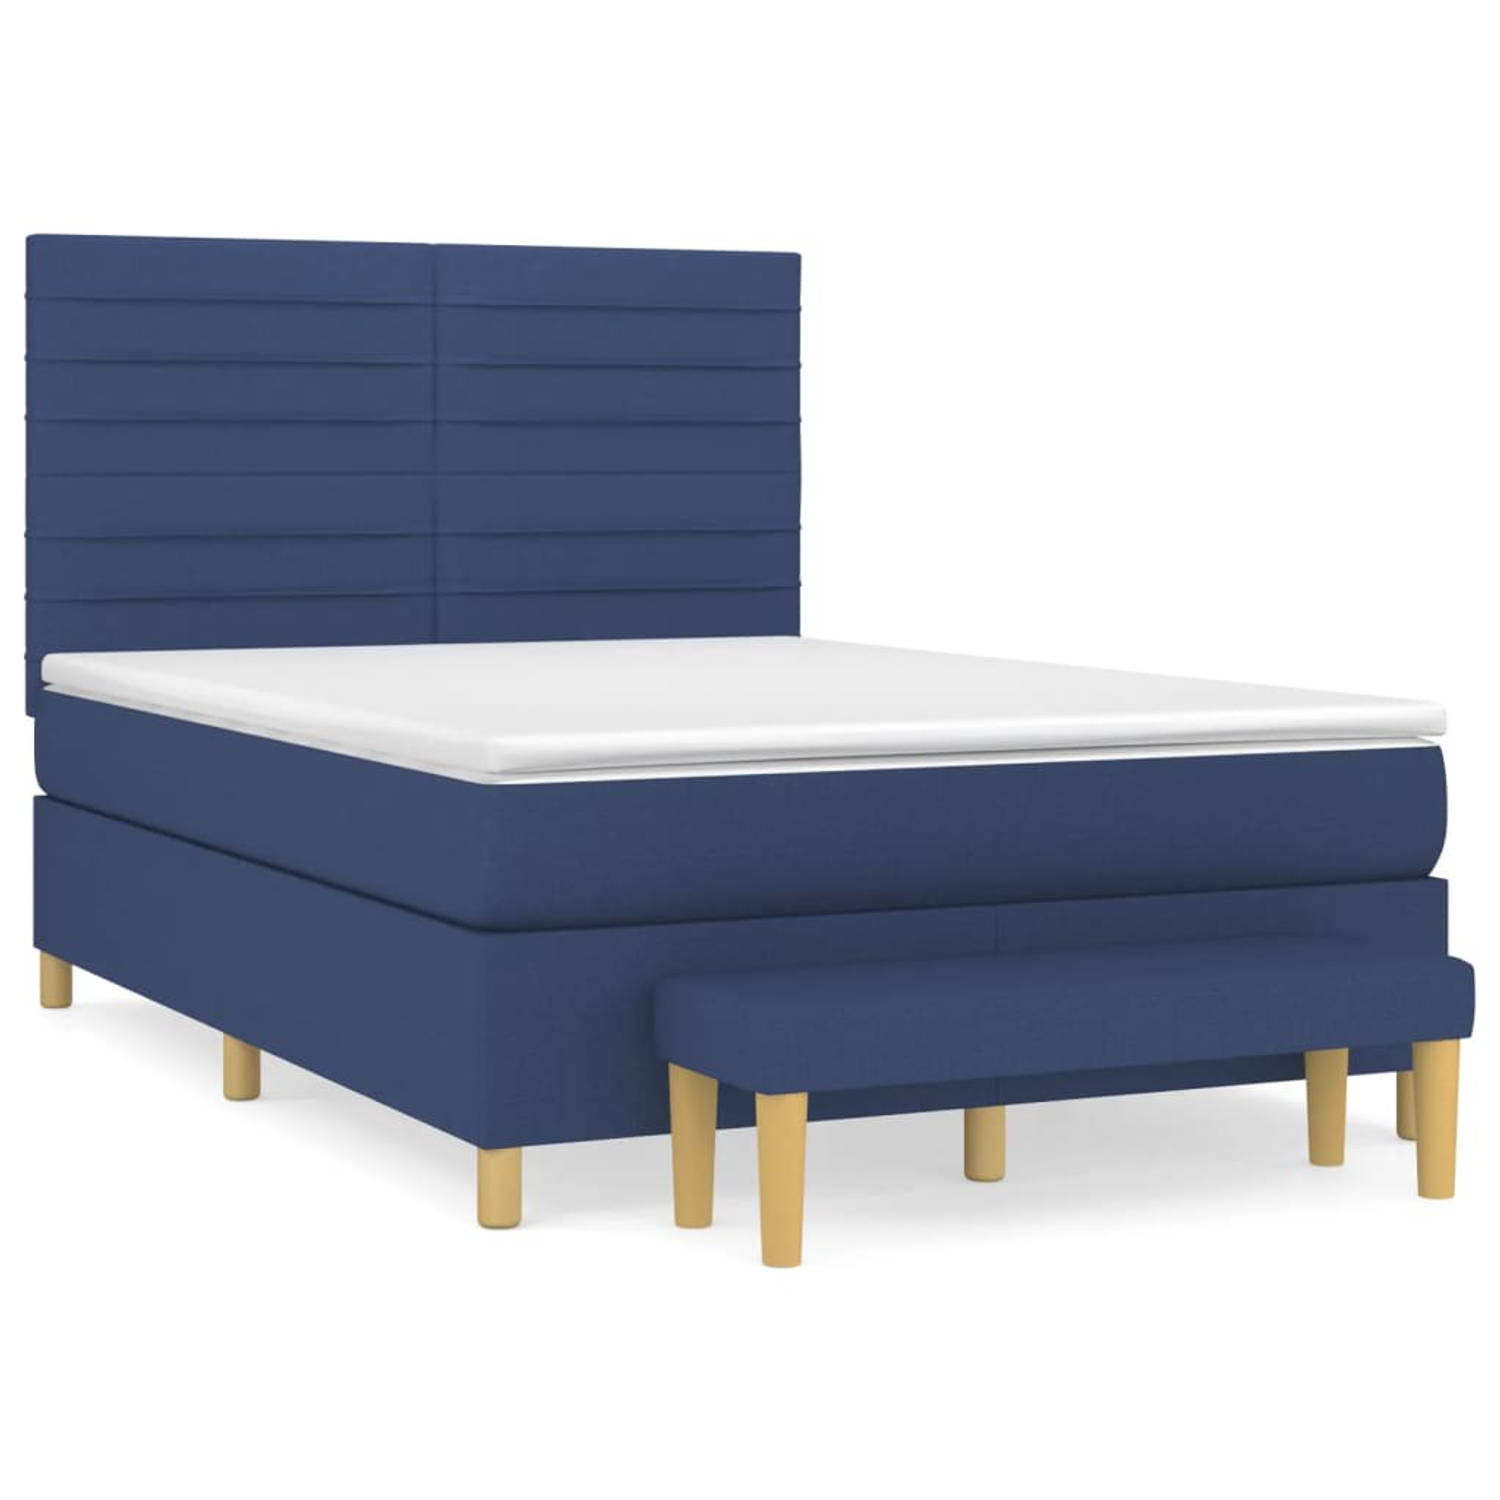 The Living Store Boxspringbed - Naam - Bed - 193 x 144 x 118/128 cm - Blauw